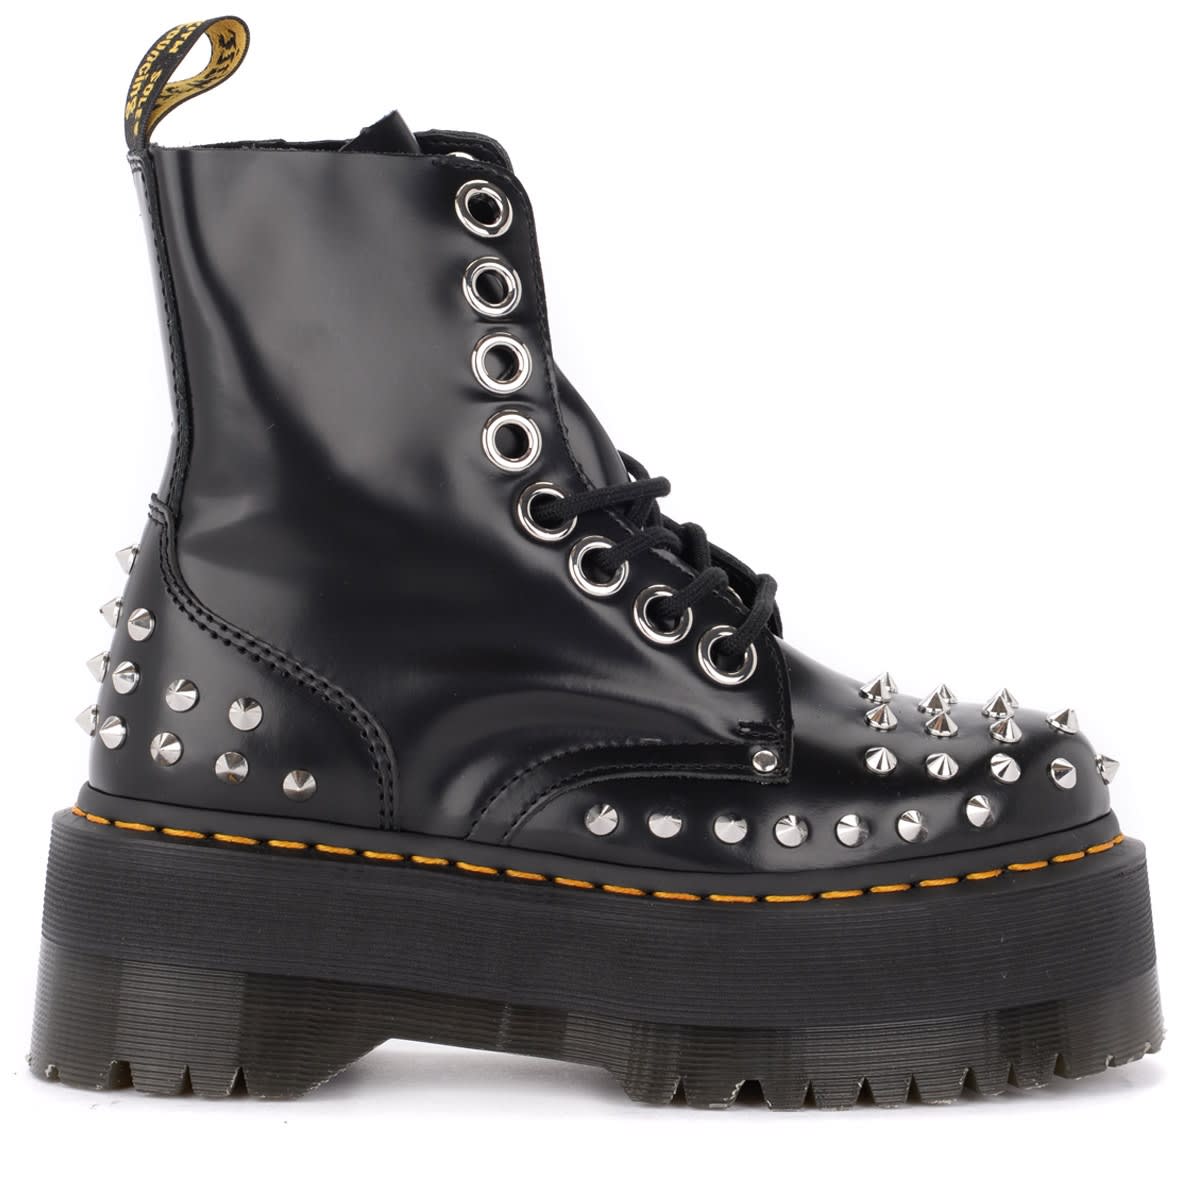 DR. MARTENS' JADON MAX AMPHIBIOUS BOOT MADE OF BLACK LEATHER WITH STUDS,11232622